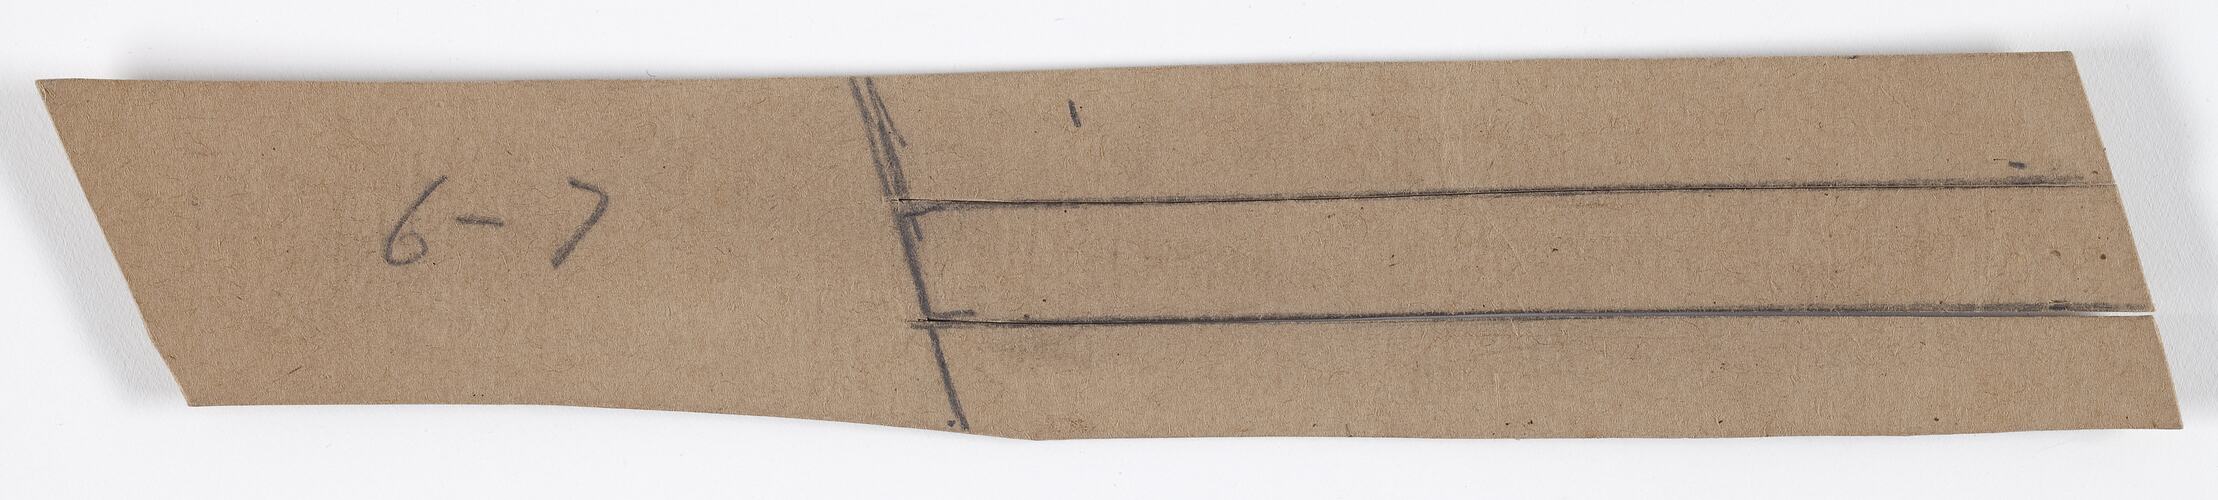 Brown colored cardboard rectangle with pencil notations.